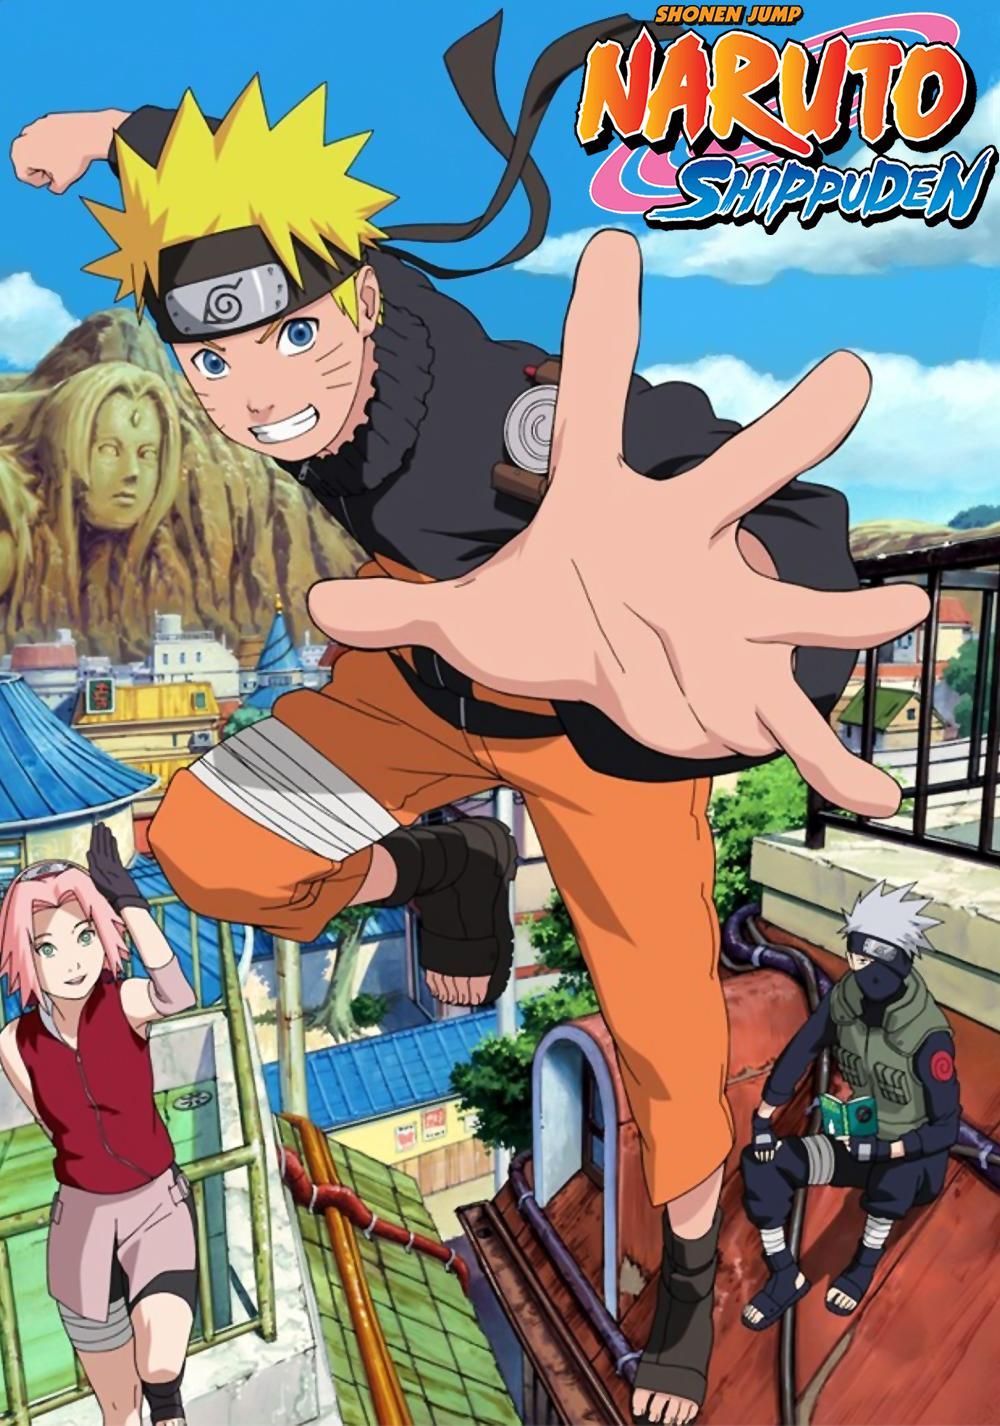 Naruto Anime Receives Four New Episodes in Honor of 20th Anniversary